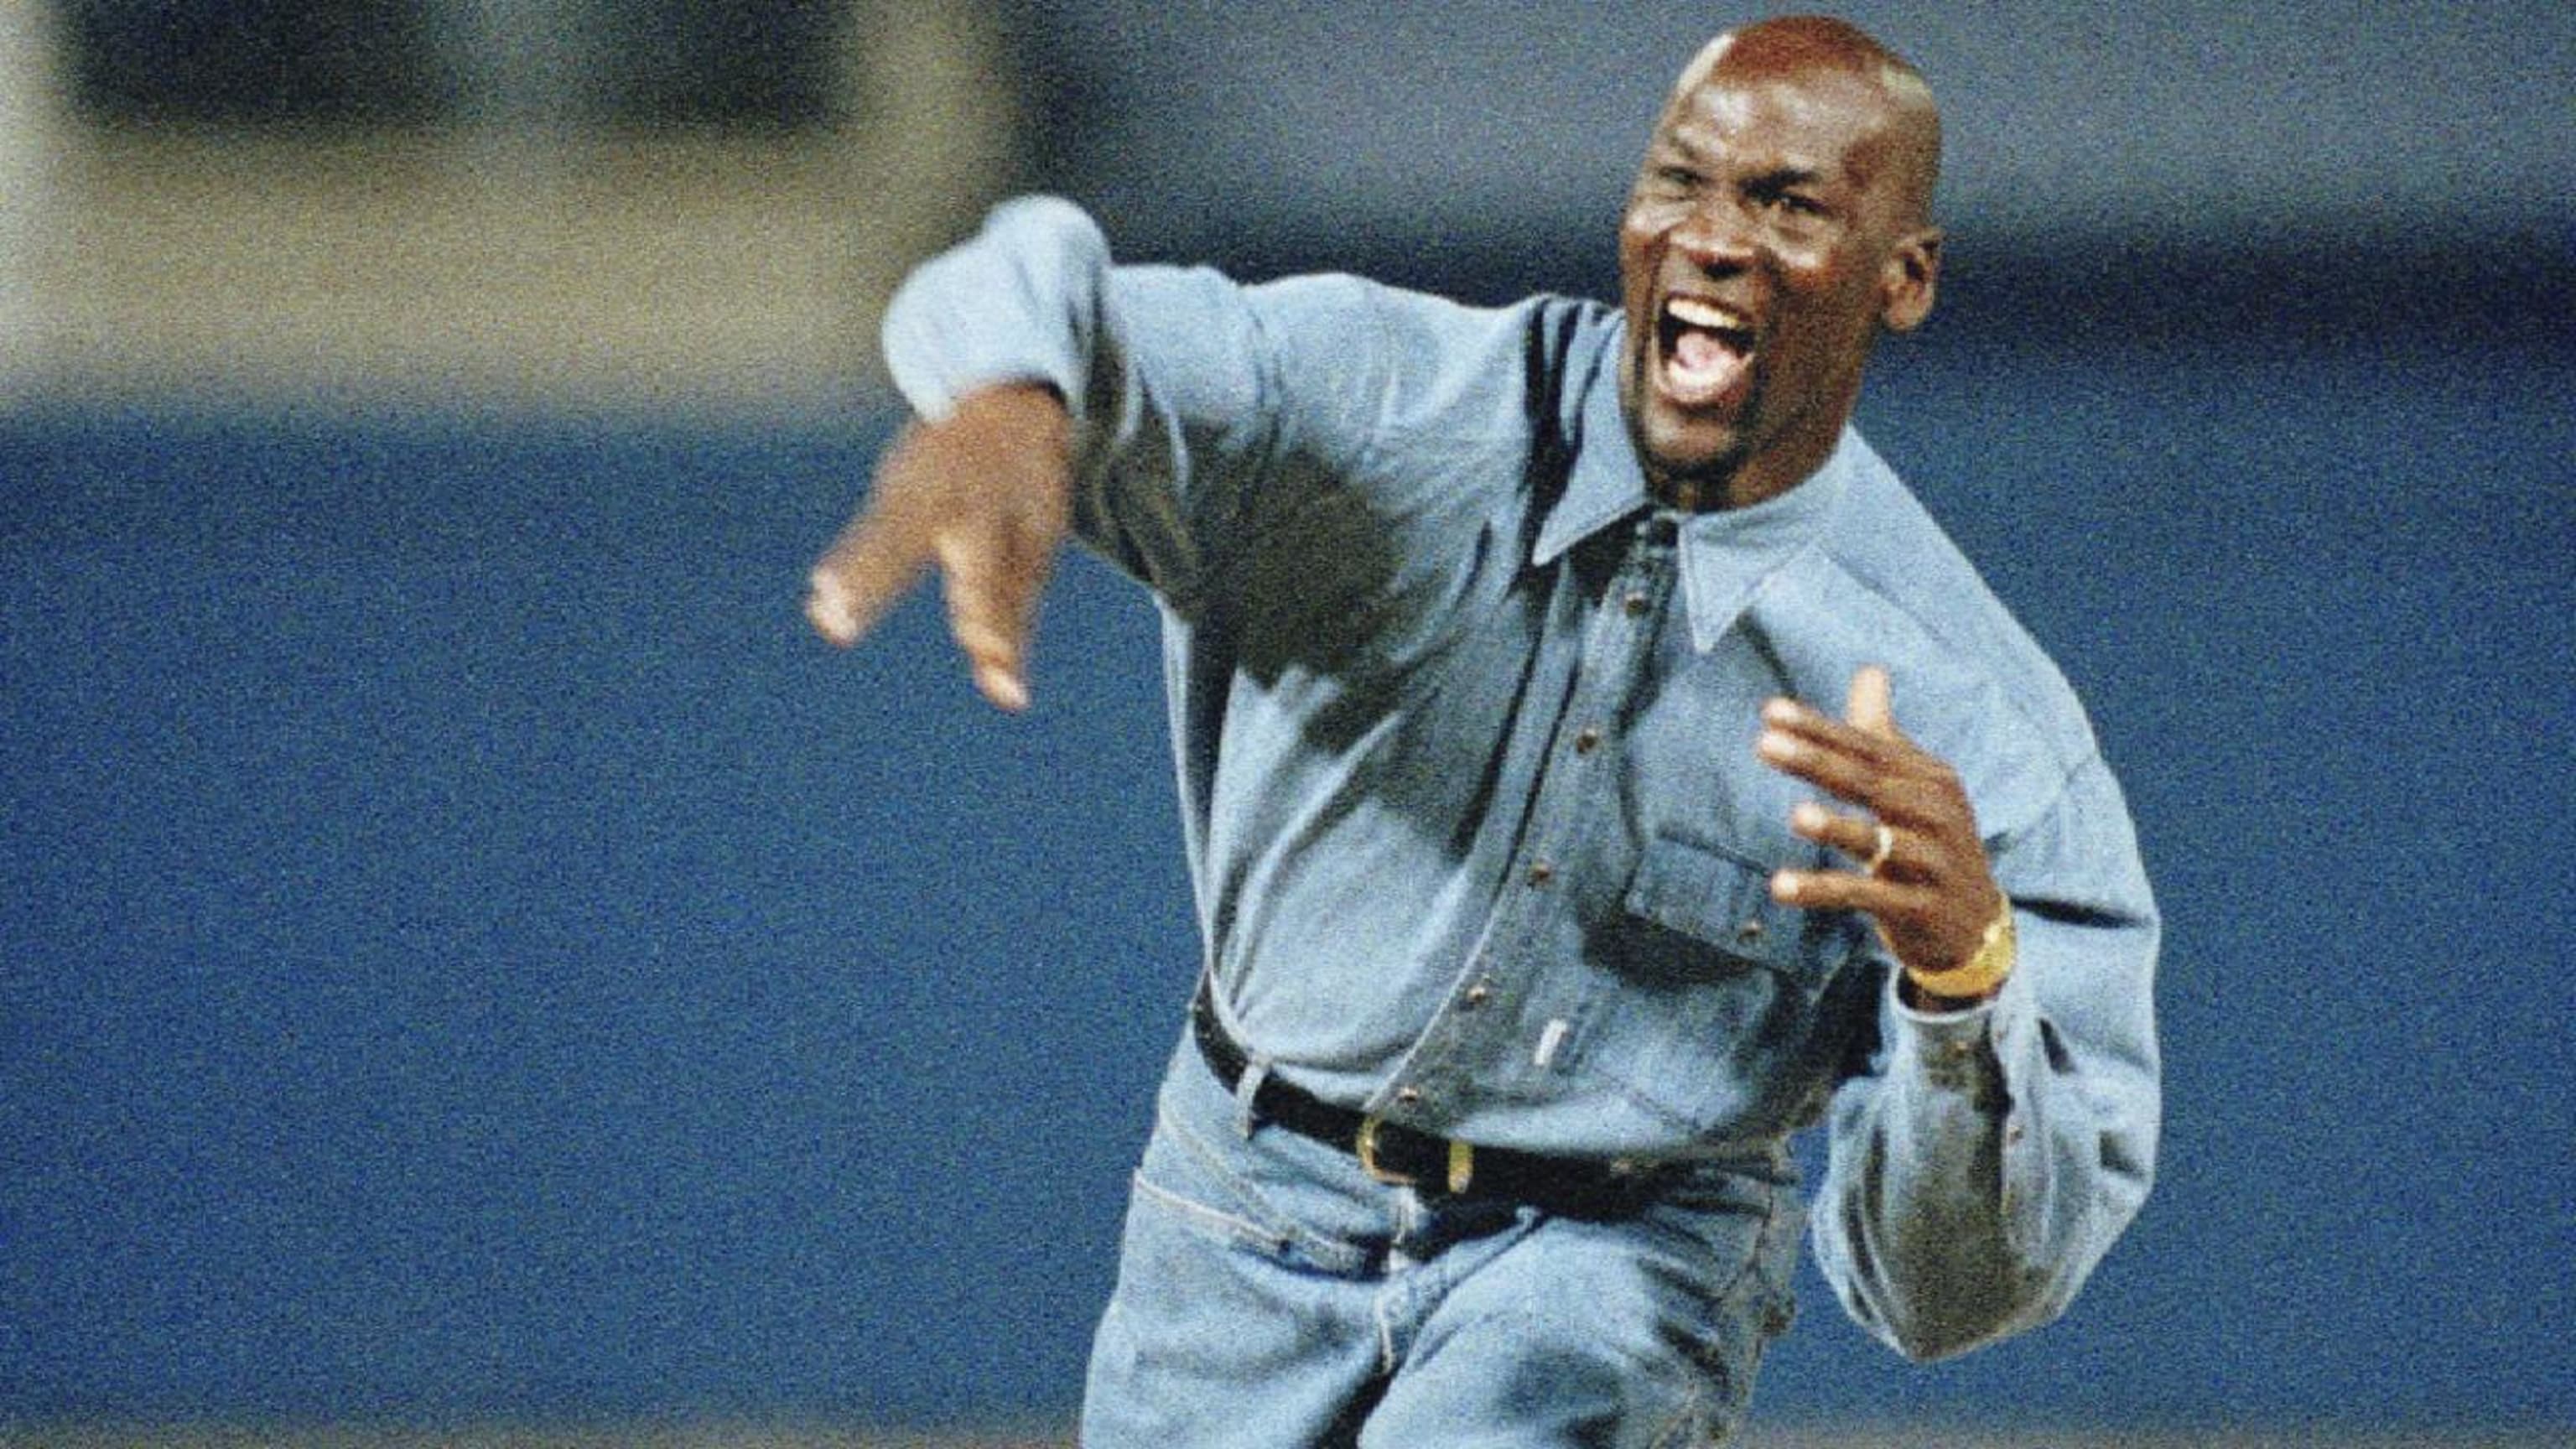 25 years ago, Michael Jordan played for the White Sox against the Cubs at  Wrigley Field — and got 2 hits